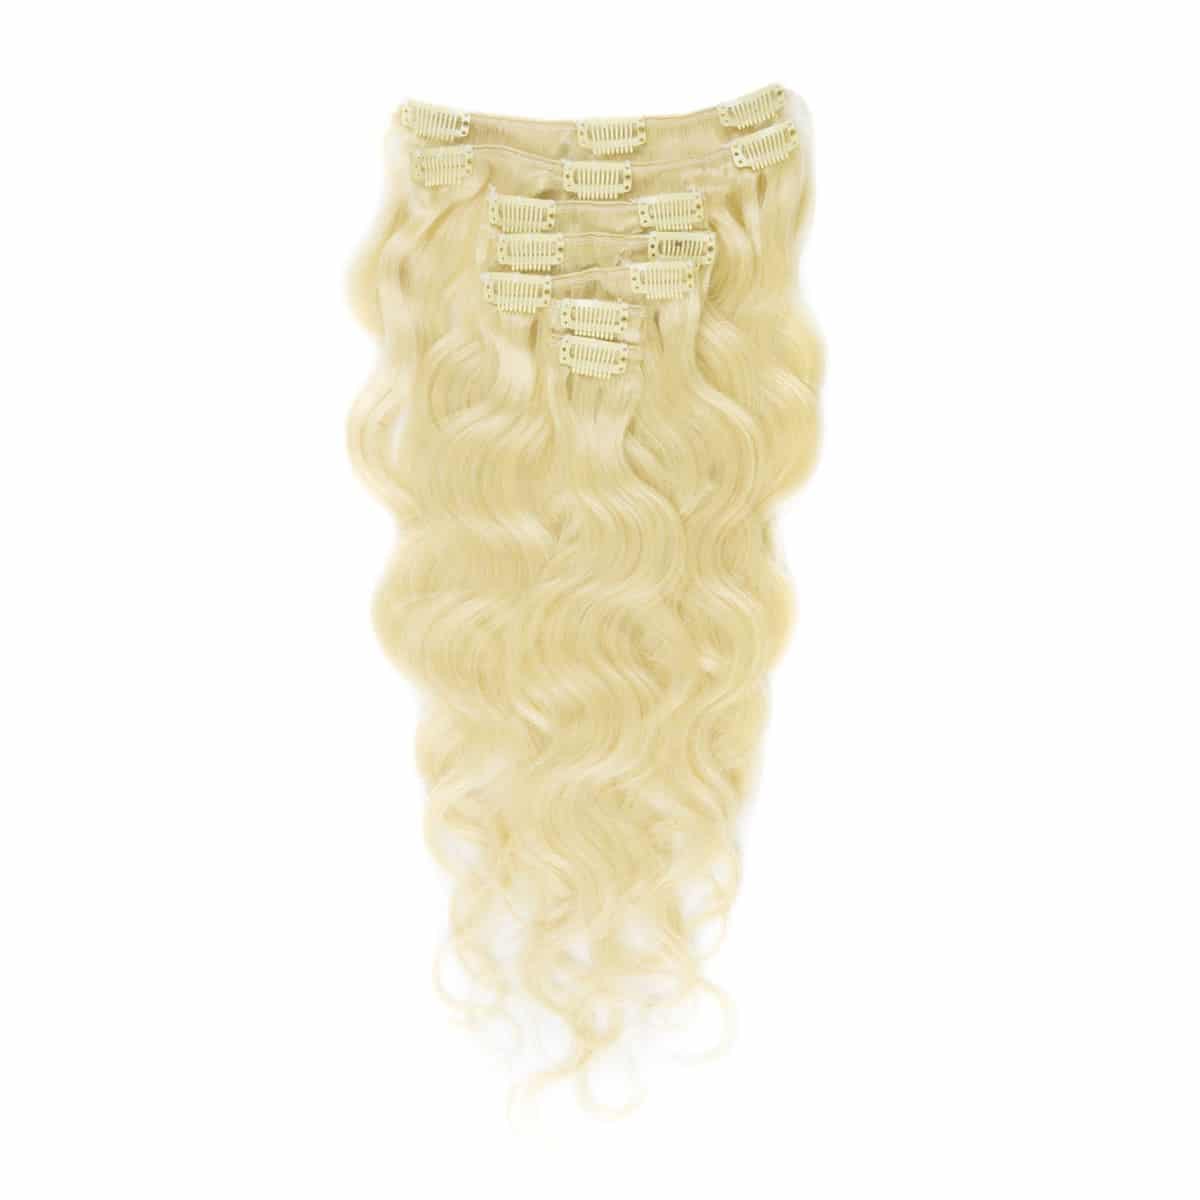 Human Hair Extensions Clip On Light Blonde 55 Cm Body Wave Hair